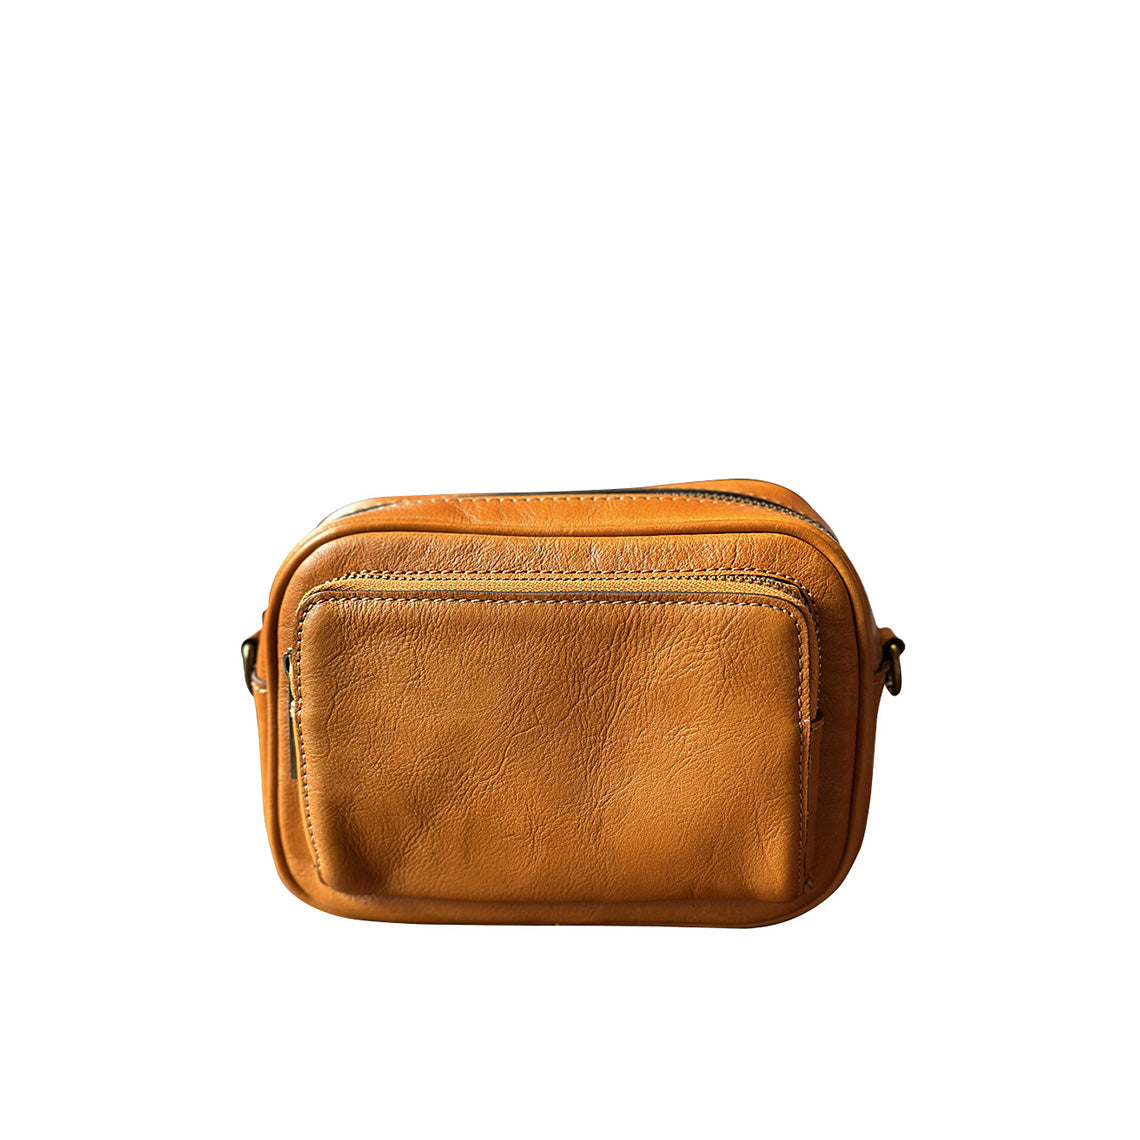 Vegetable Tanned Leather Bag | Small Leather Bags